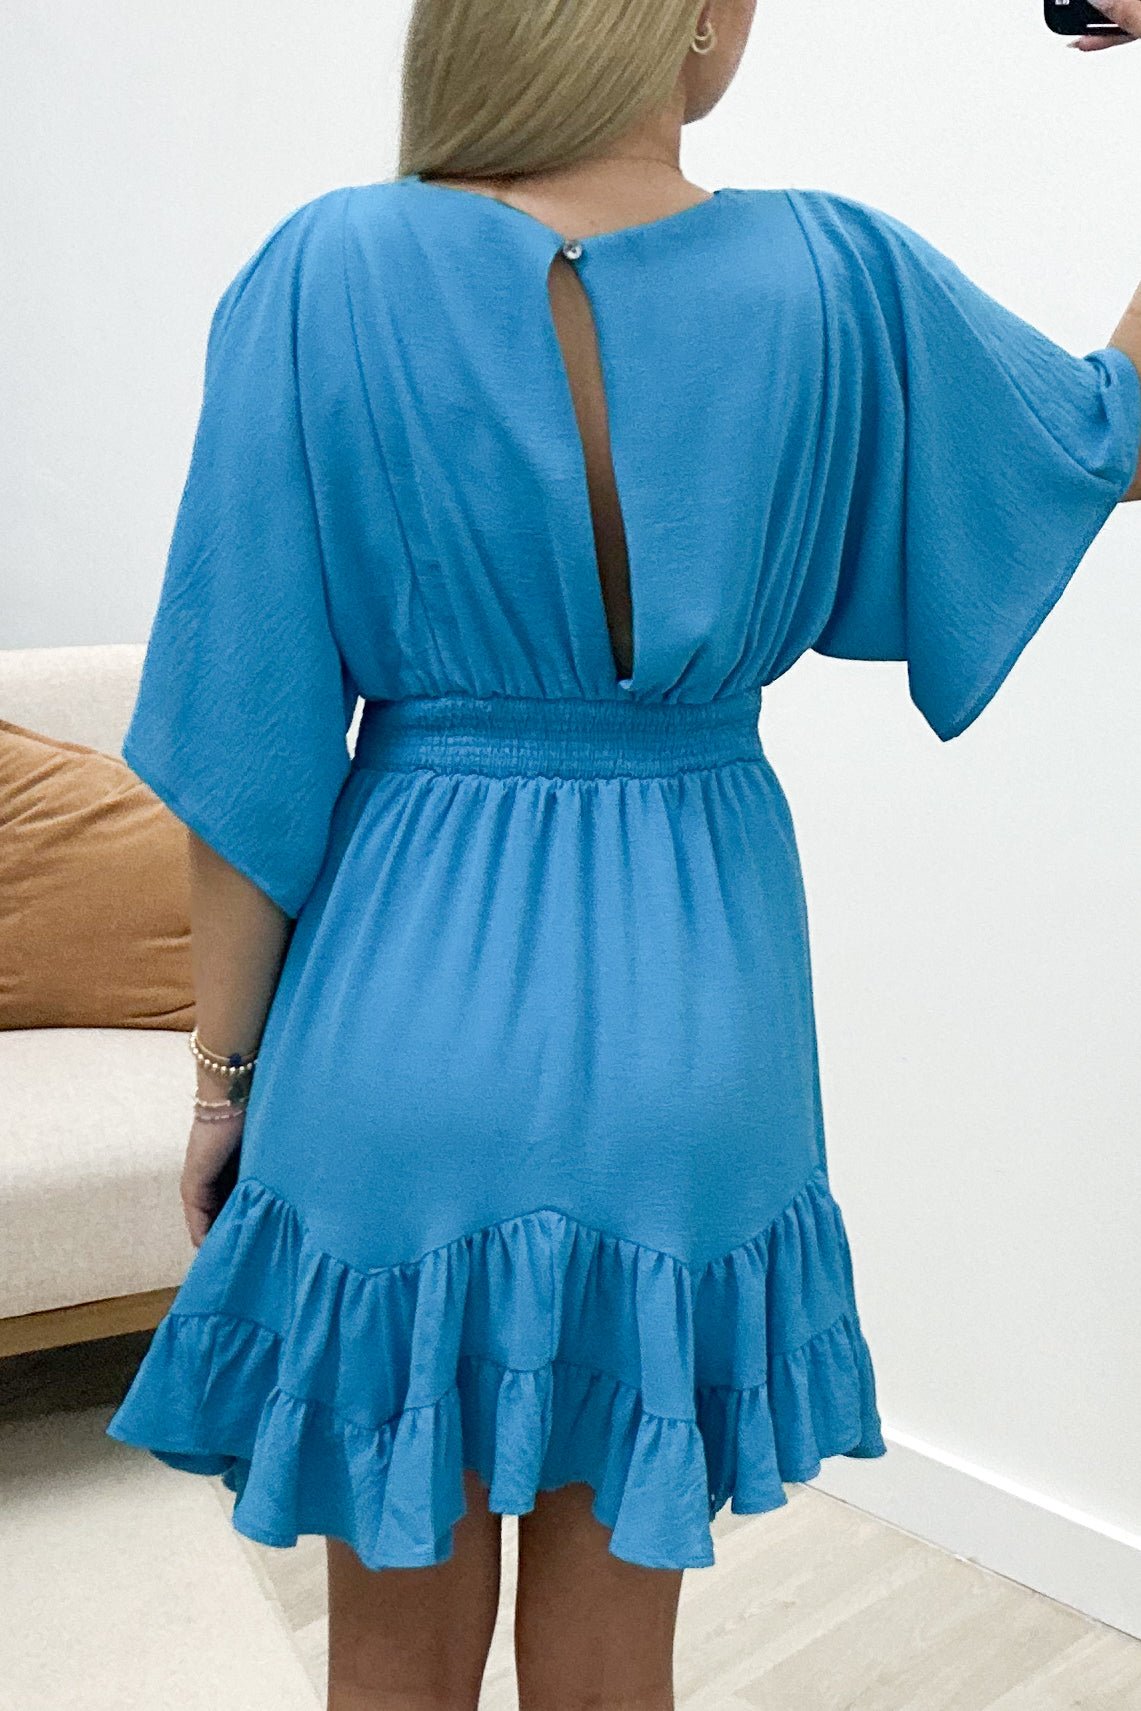 "Fearless And Free" Dress (Diva Blue) - Happily Ever Aften